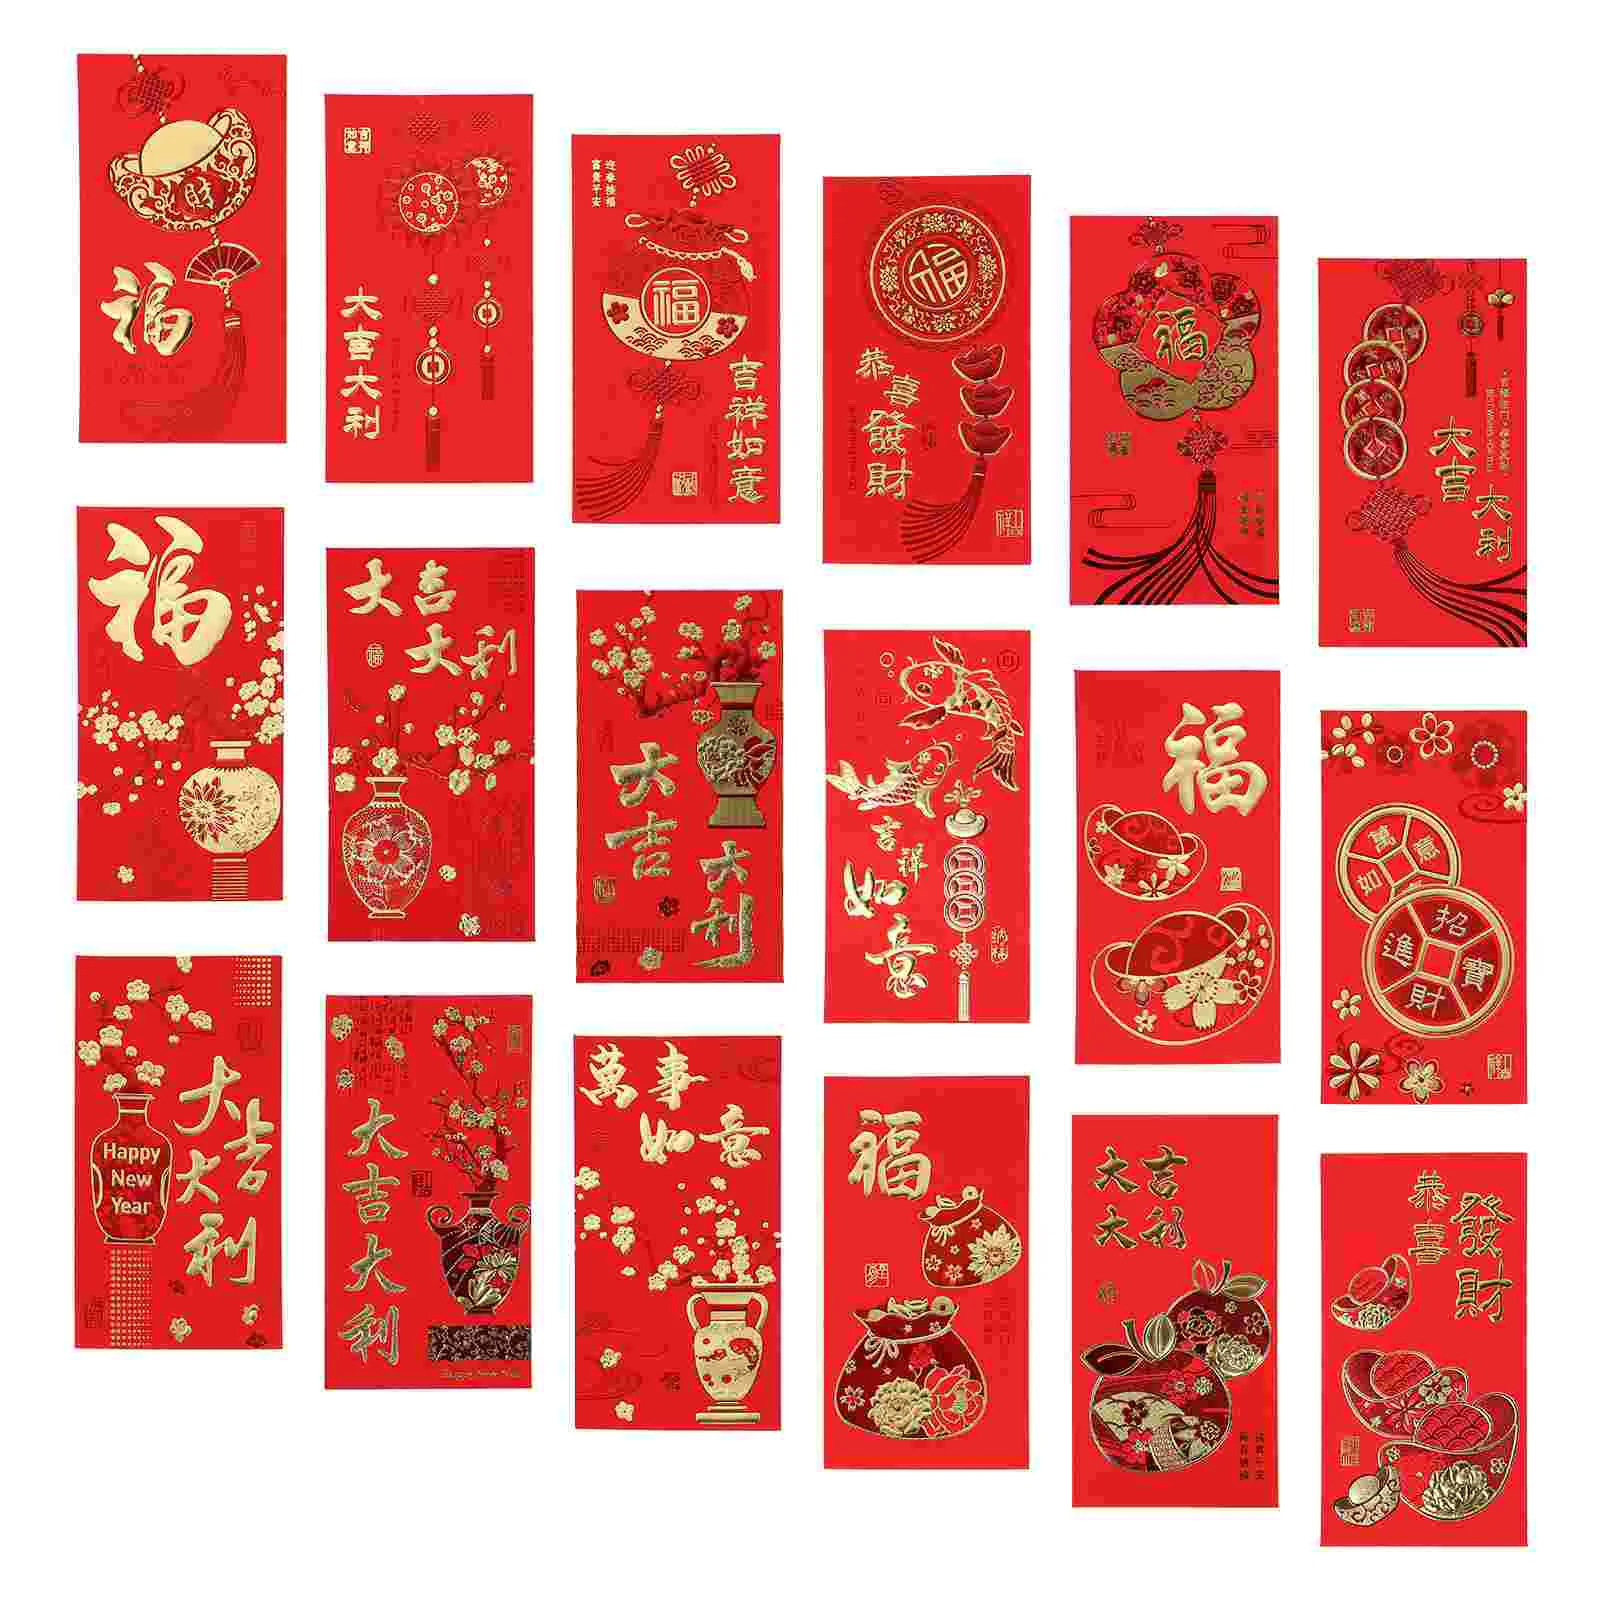 

Red Year Envelopes Chinese New Money Envelope Hong Bao Festival Spring Lucky Packet Hongbao Packets Gift Pocket Pockets Lunar